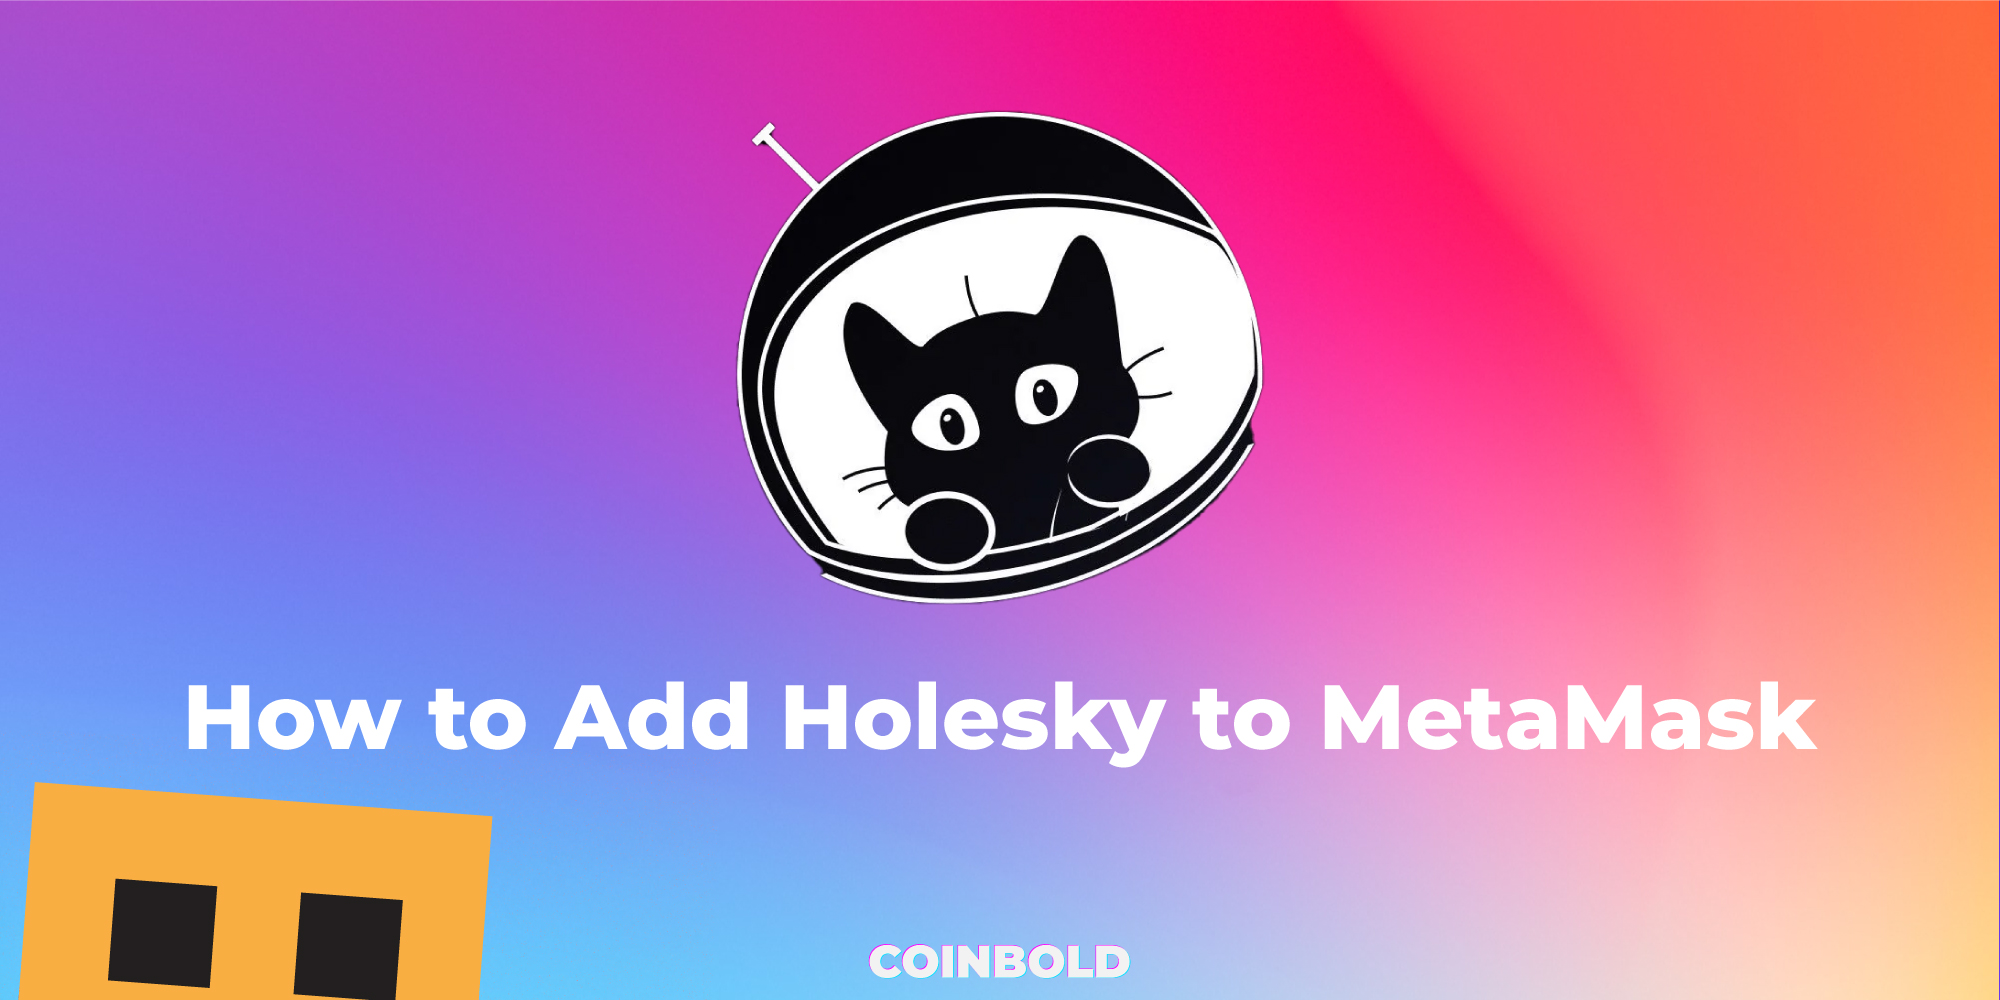 How to Add Holesky to MetaMask